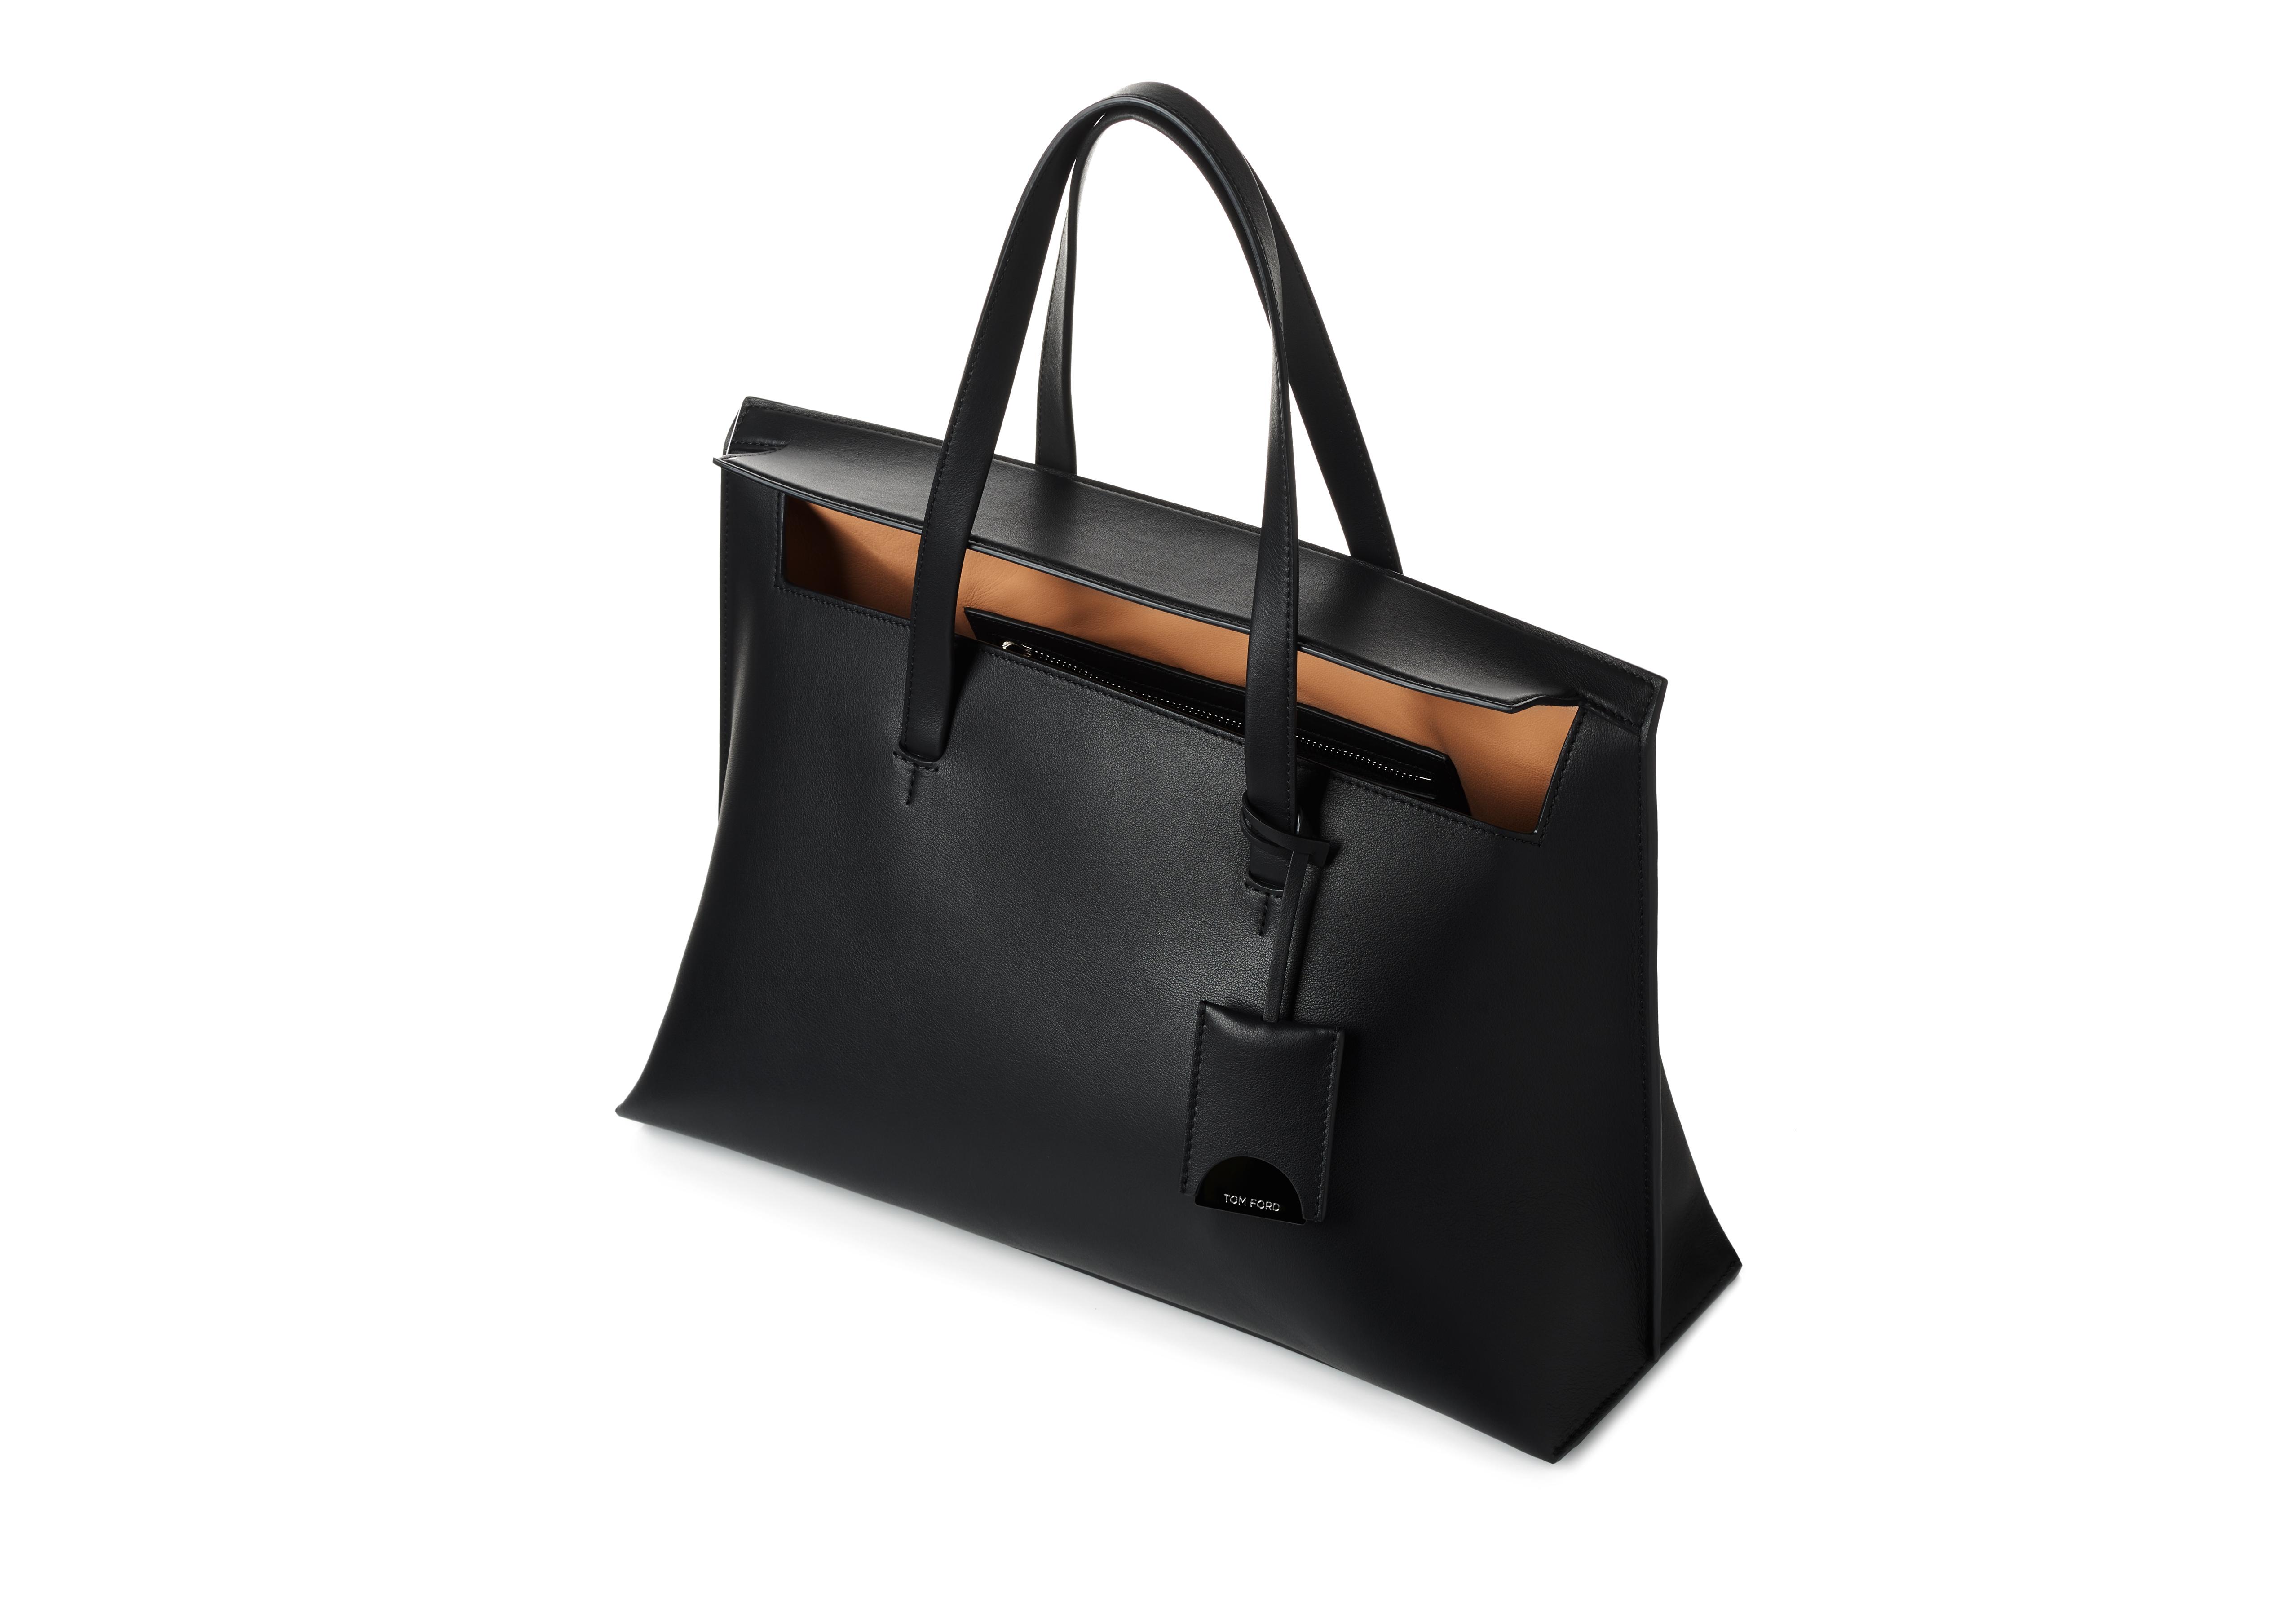 2 Stores In Stock: TOM FORD Small Serina Tote Bag, Black | ModeSens